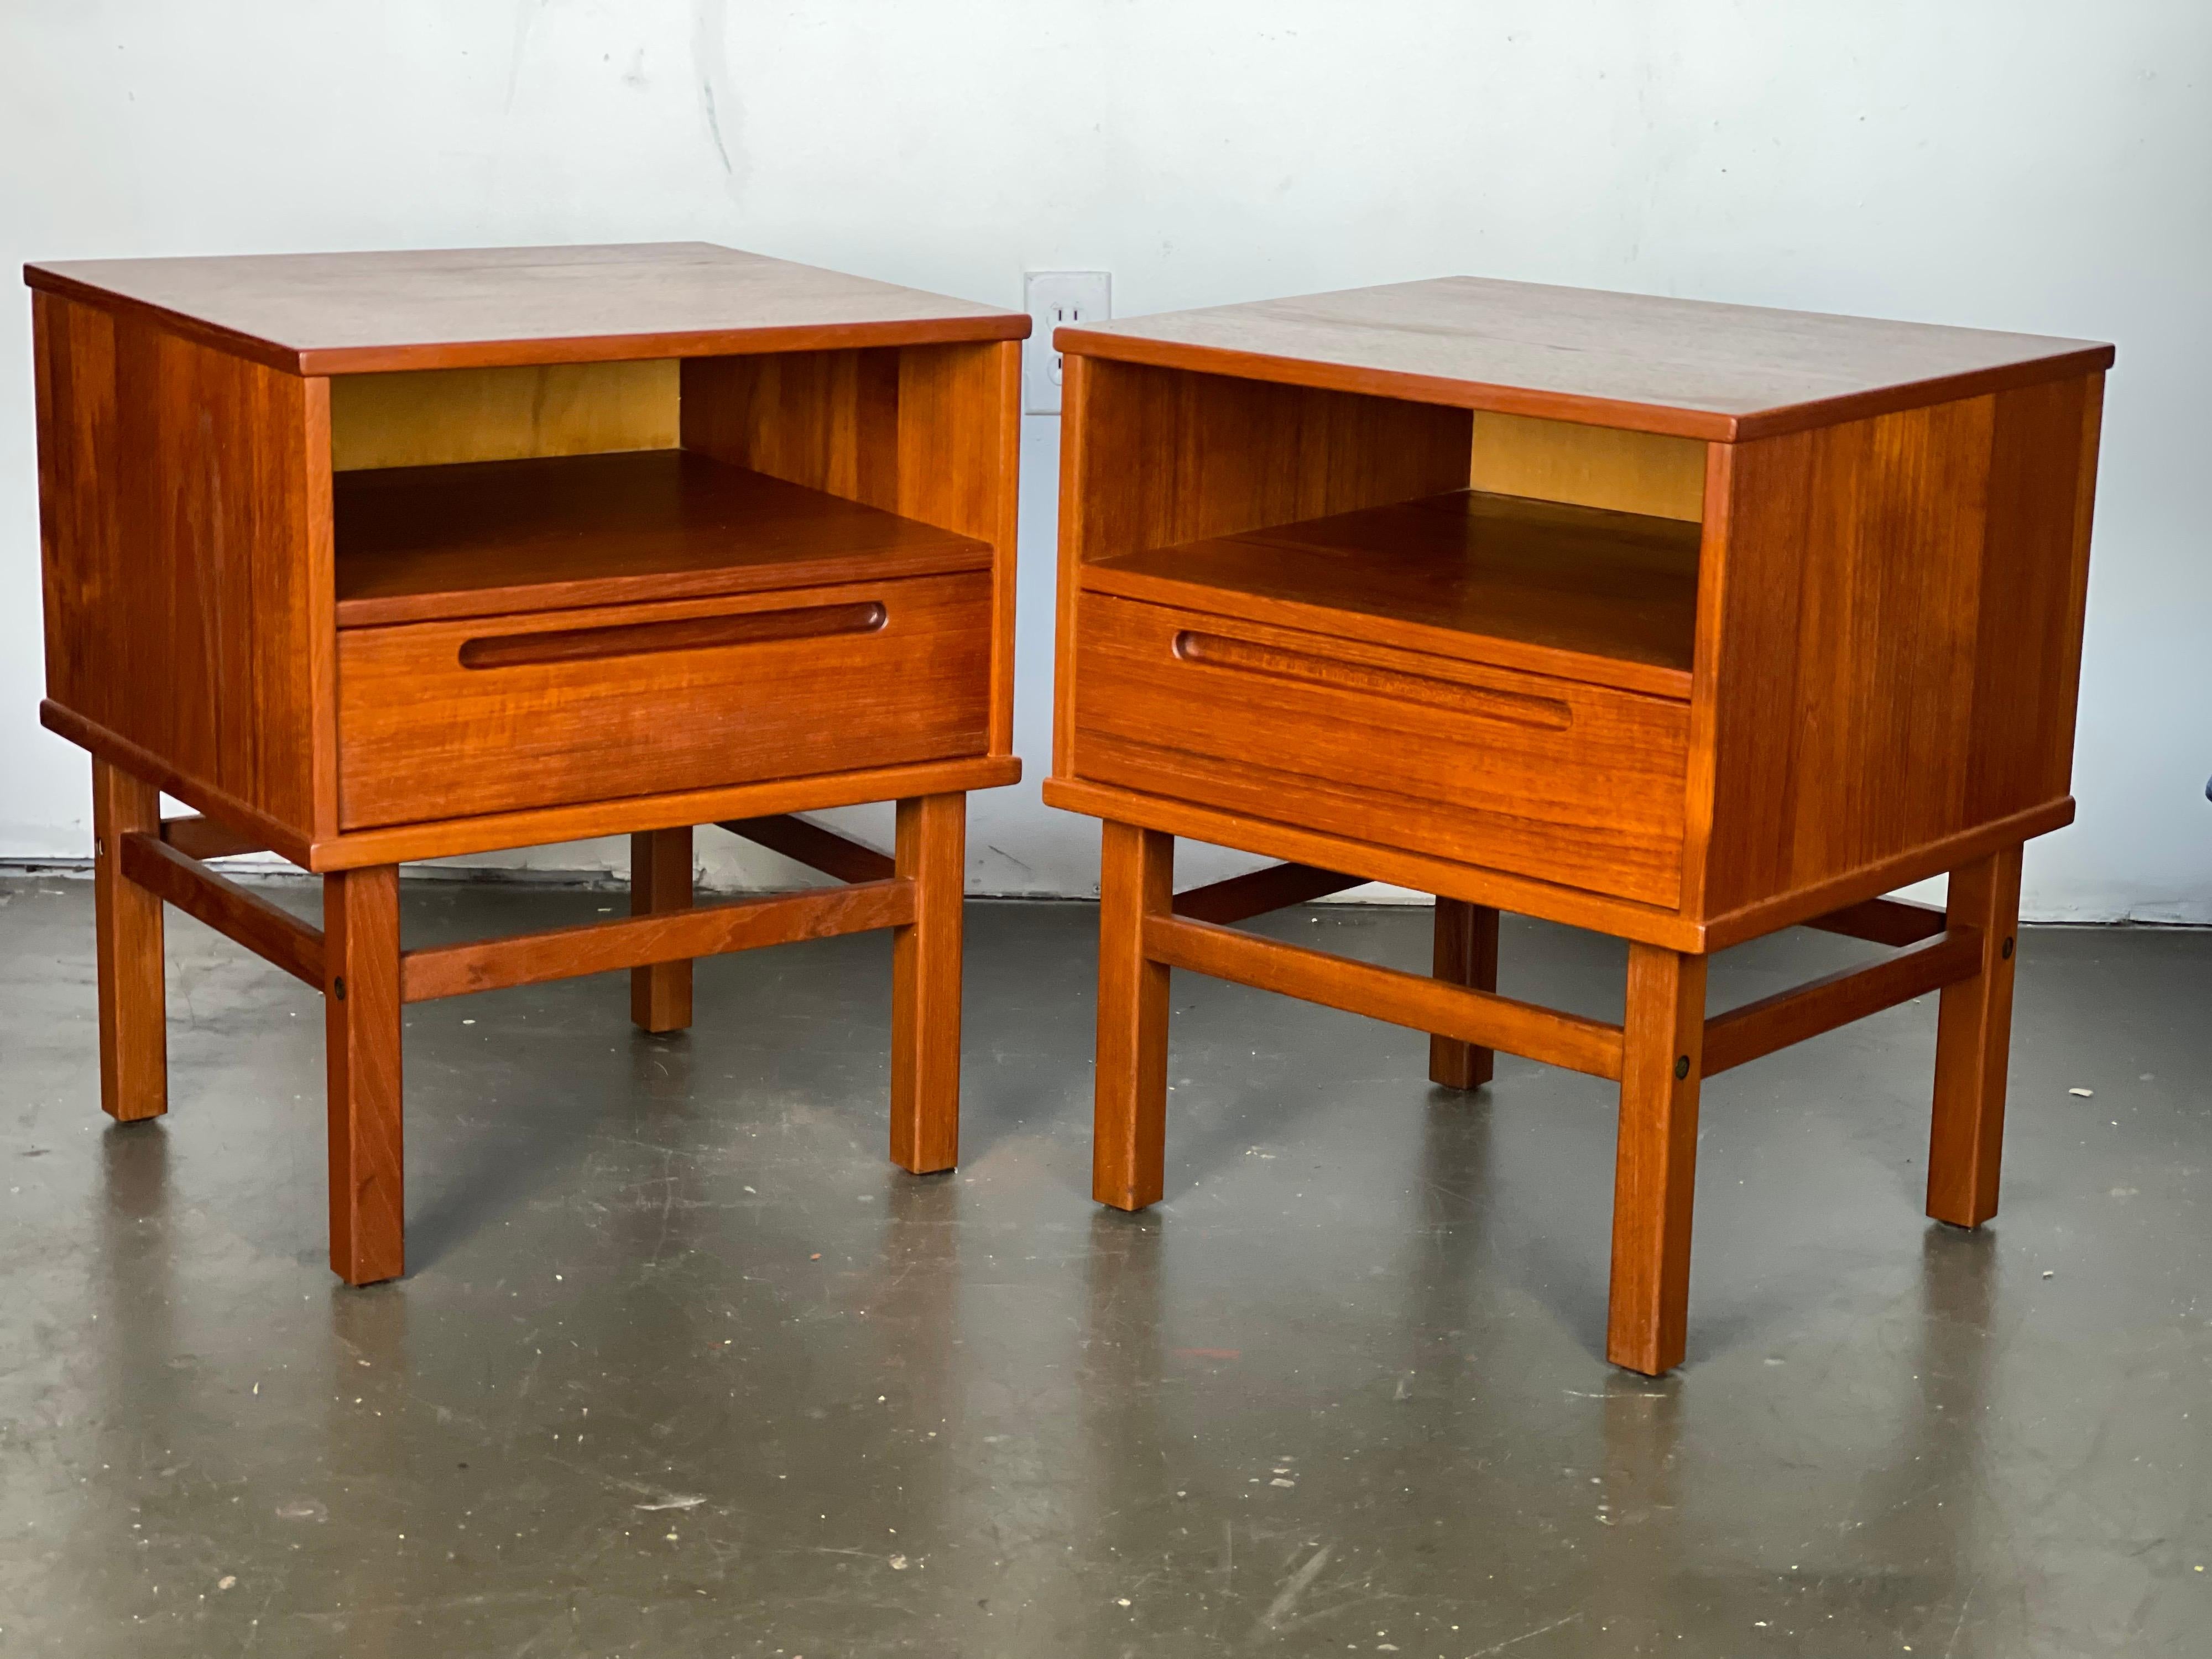 Very nice original condition nightstands by Nils Jonnson for Torring Mobelfabrik of Denmark. Check out the amazing psychedelic drawer pape!. 
Some edge wear - very nice shape!  
19.5